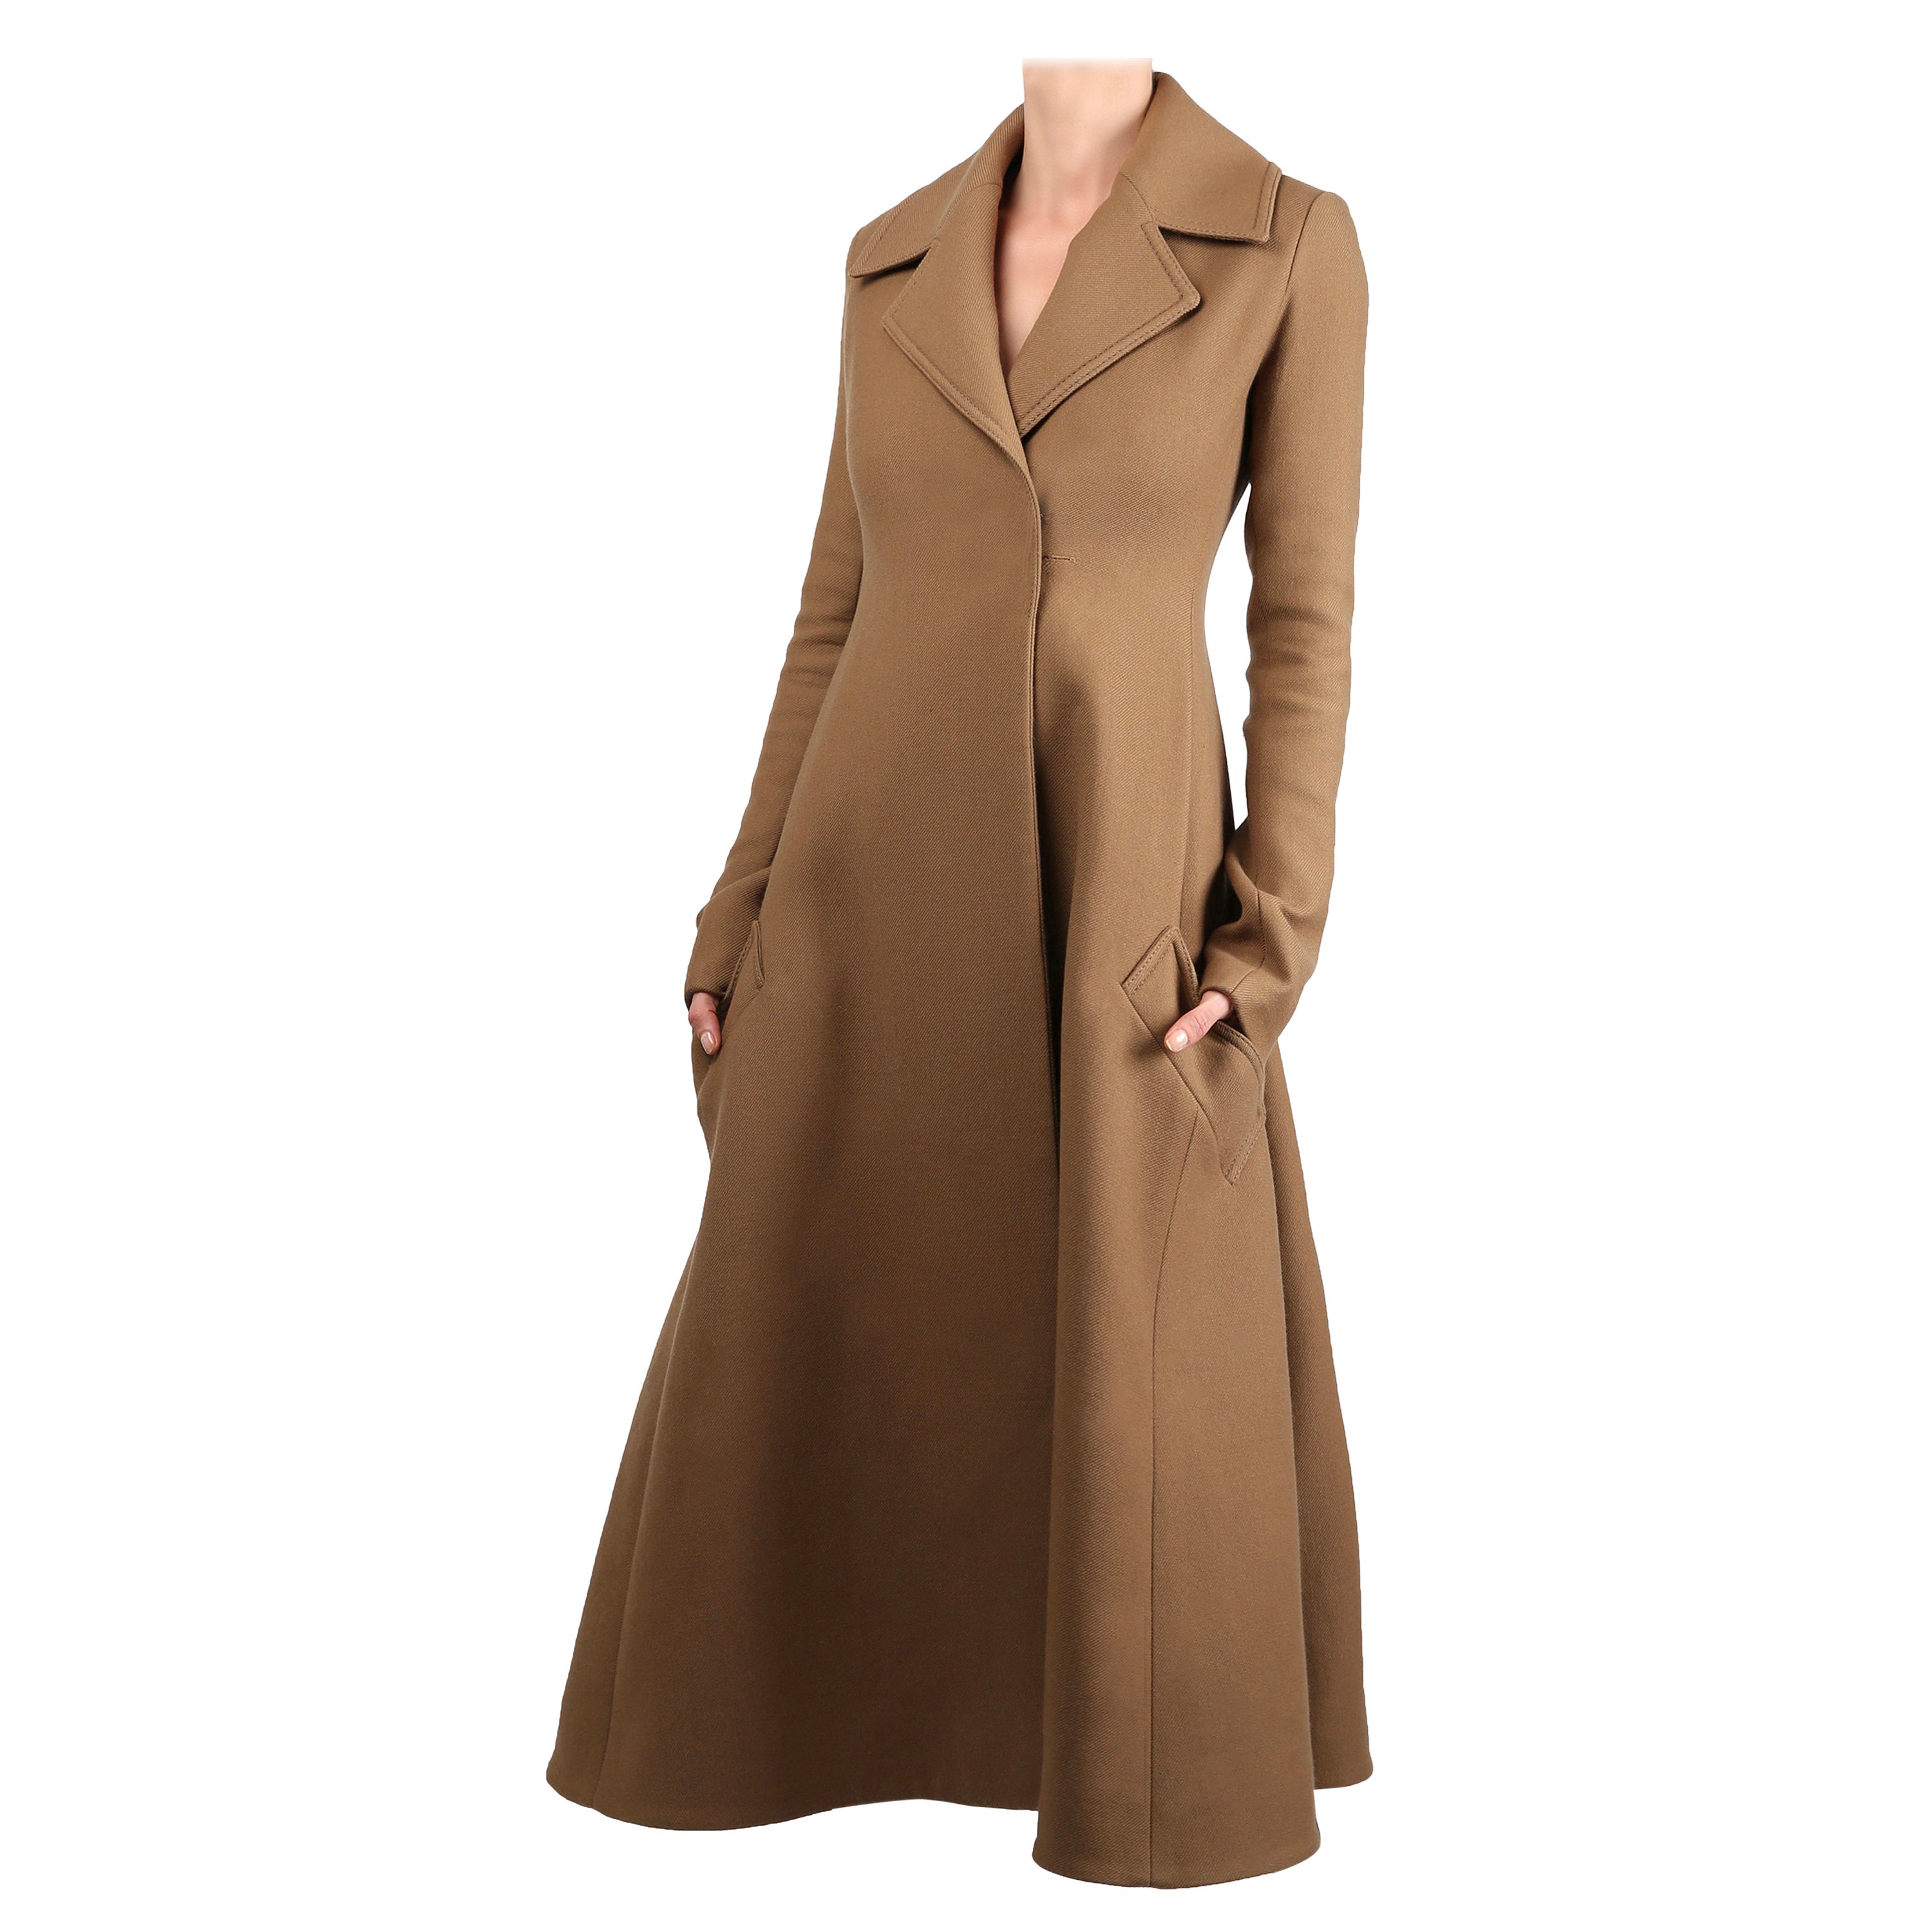 Celine Fall 2014 Phoebe Philo  gabardine wool fit and flare maxi coat in camel